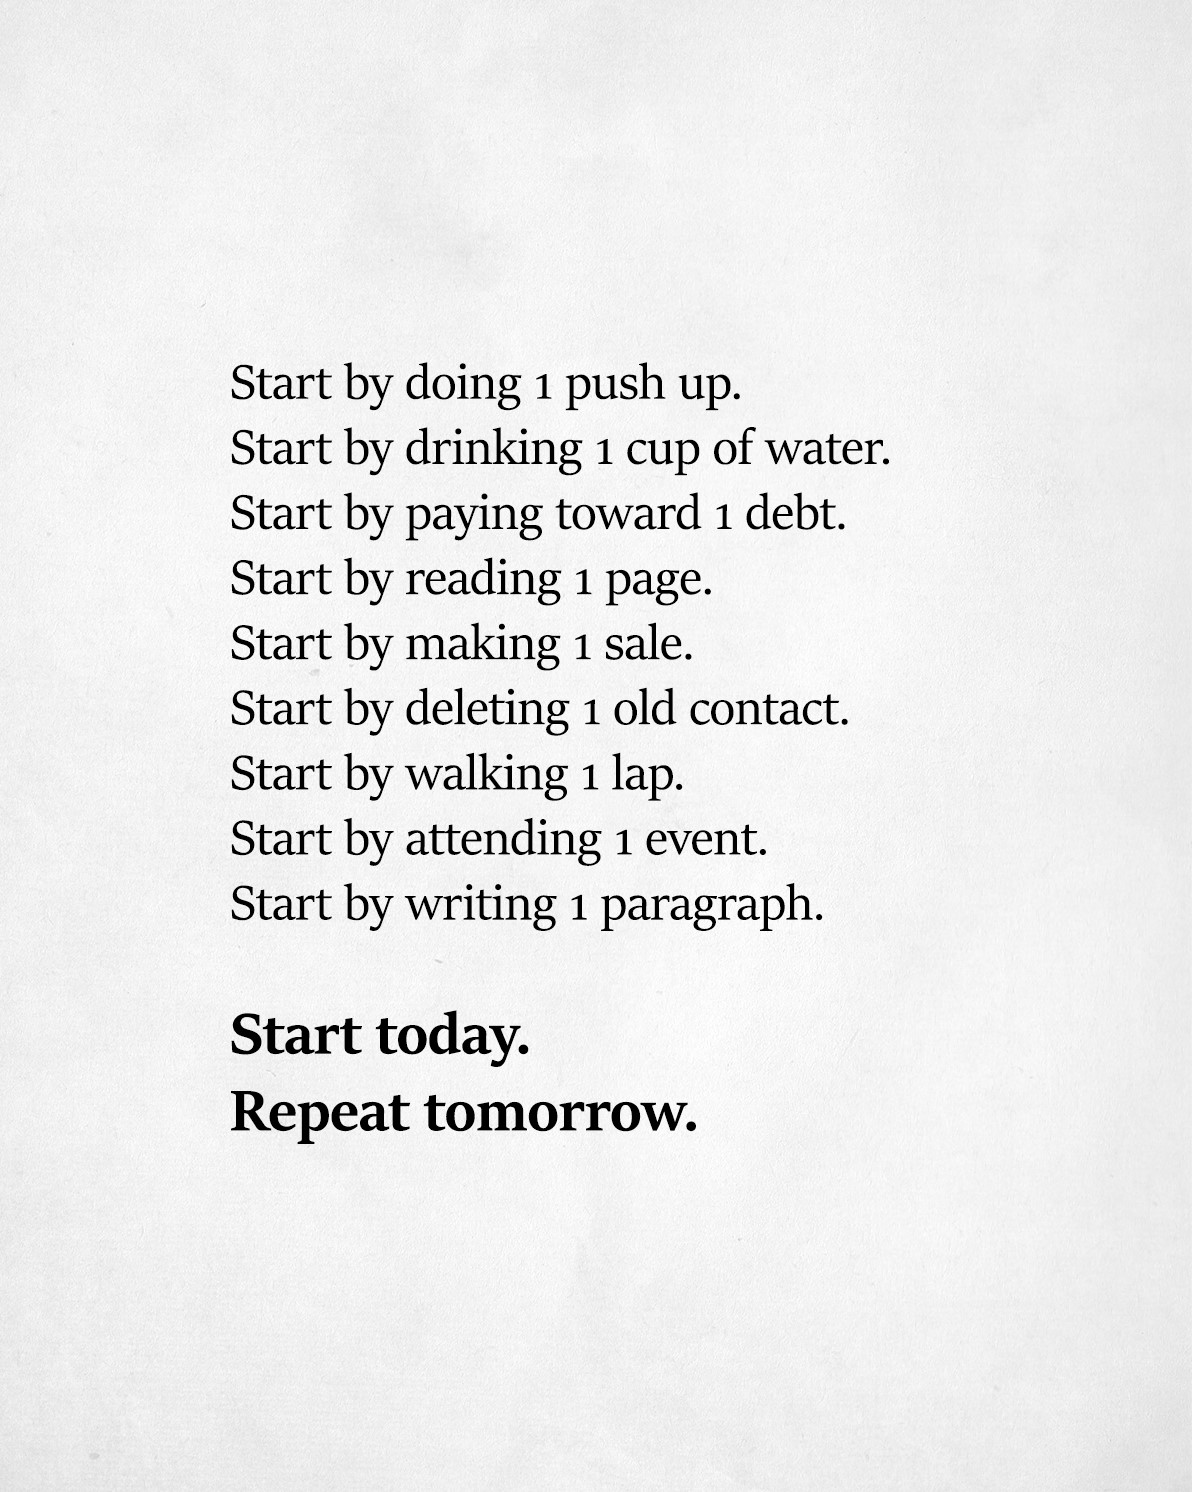 start by doing 1 push up, start today, repeat tomorrow